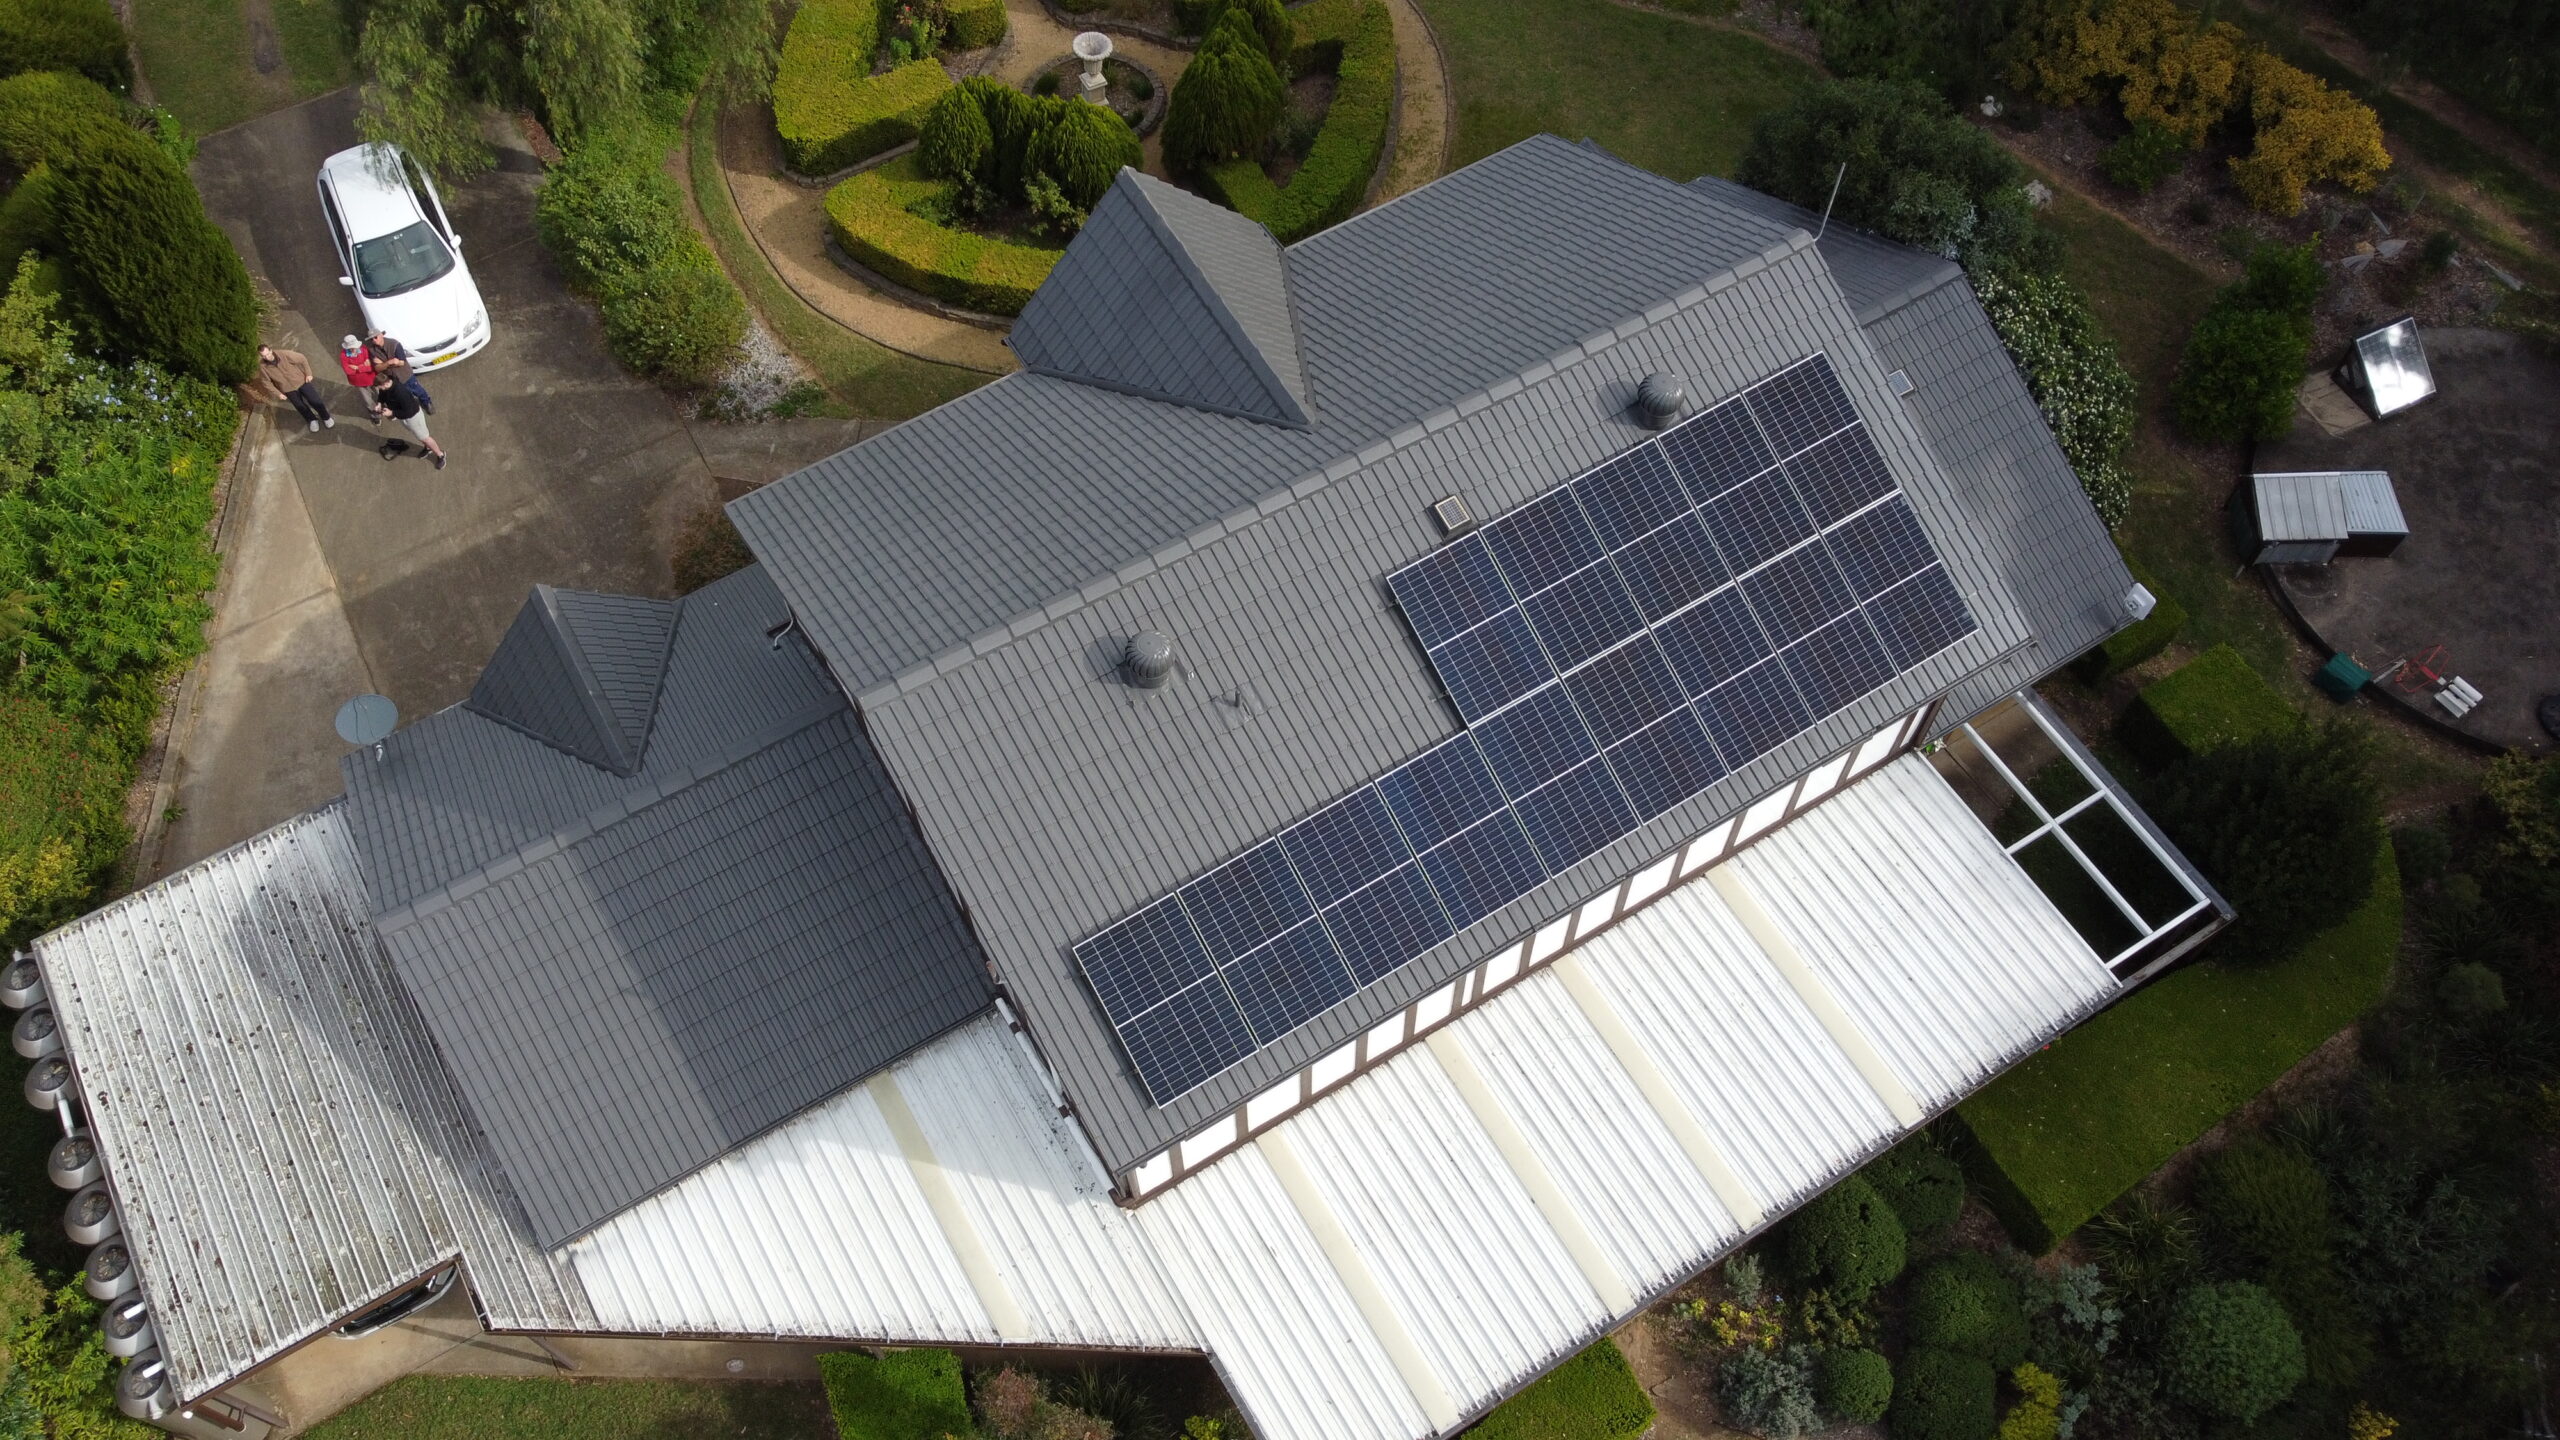 A house in Appin, NSW with solar installed on its roof